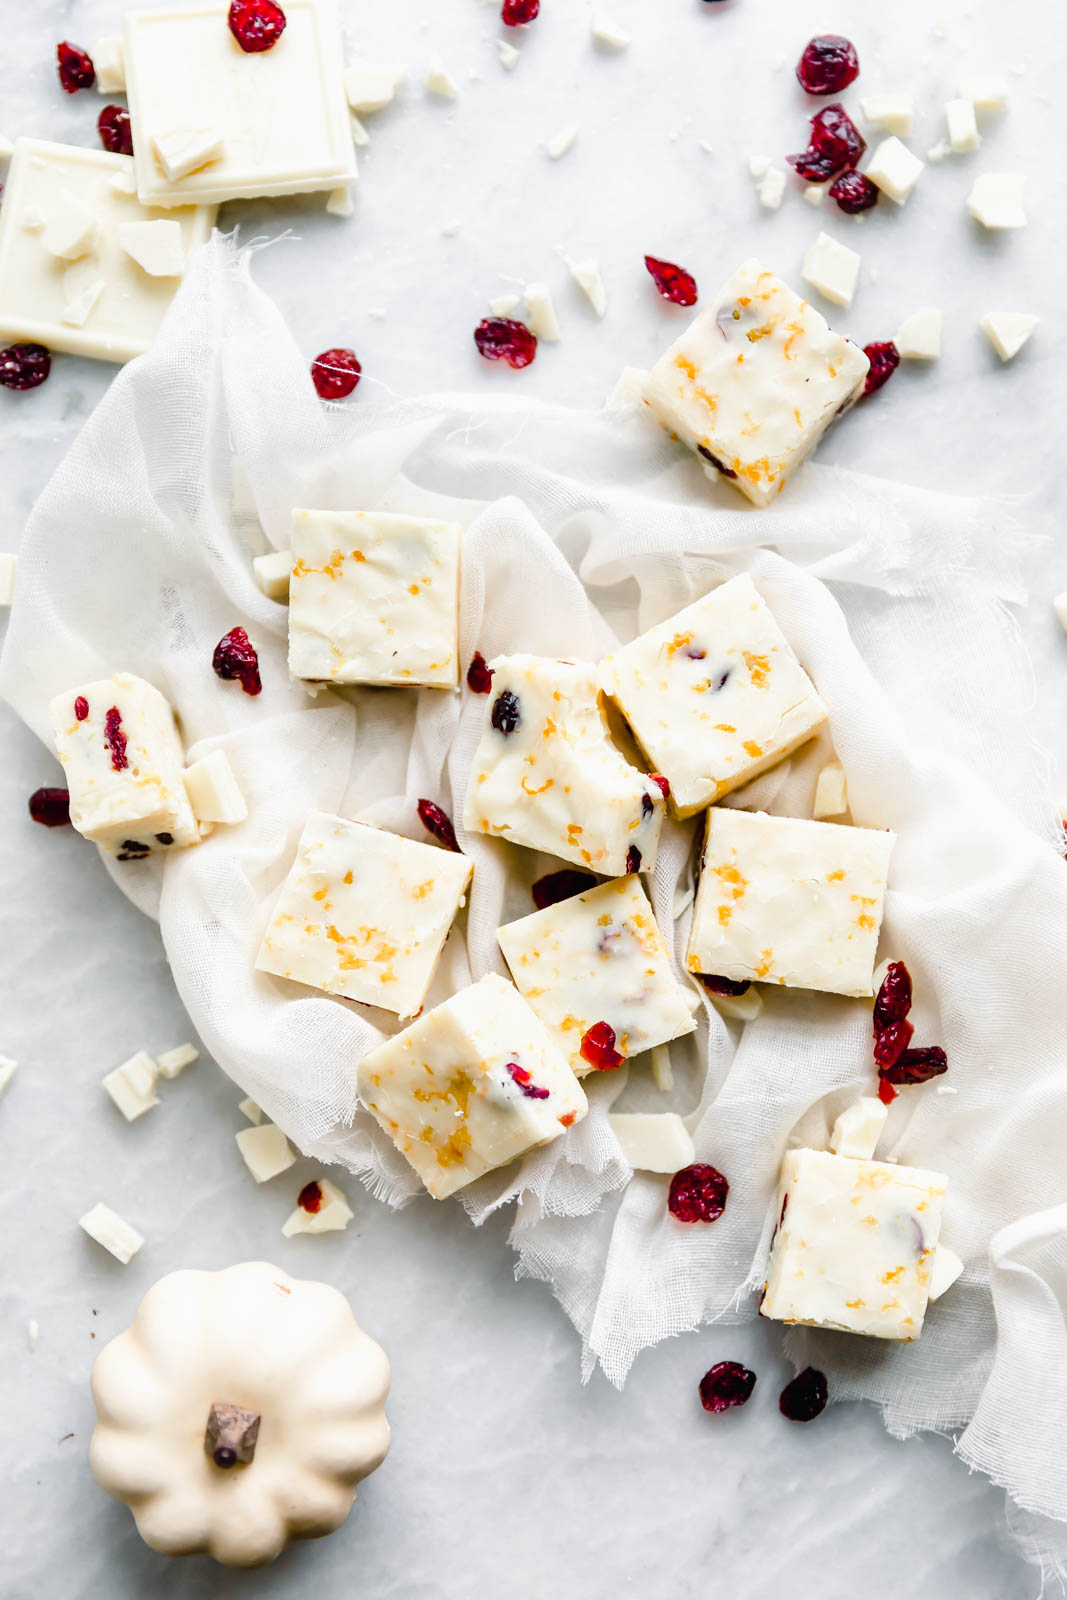 This 4-ingredient Cranberry Orange White Chocolate Fudge is a quick and delicious holiday treat the whole family will love!